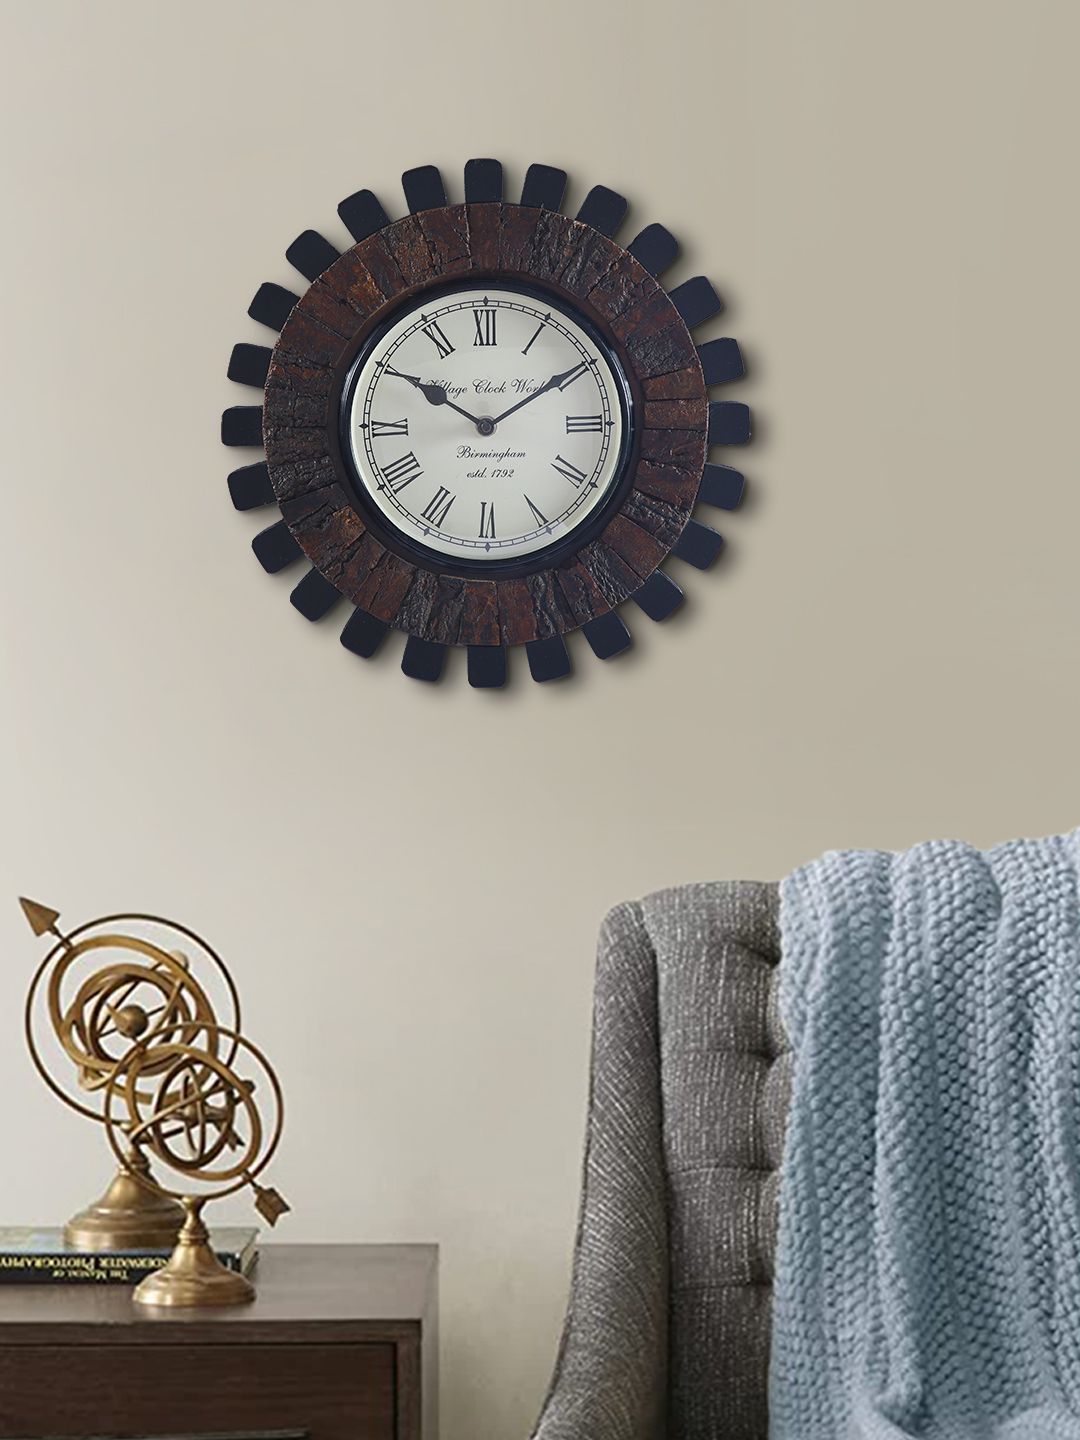 Aapno Rajasthan Navy Blue & Copper-Toned Textured Contemporary Wall Clock Price in India